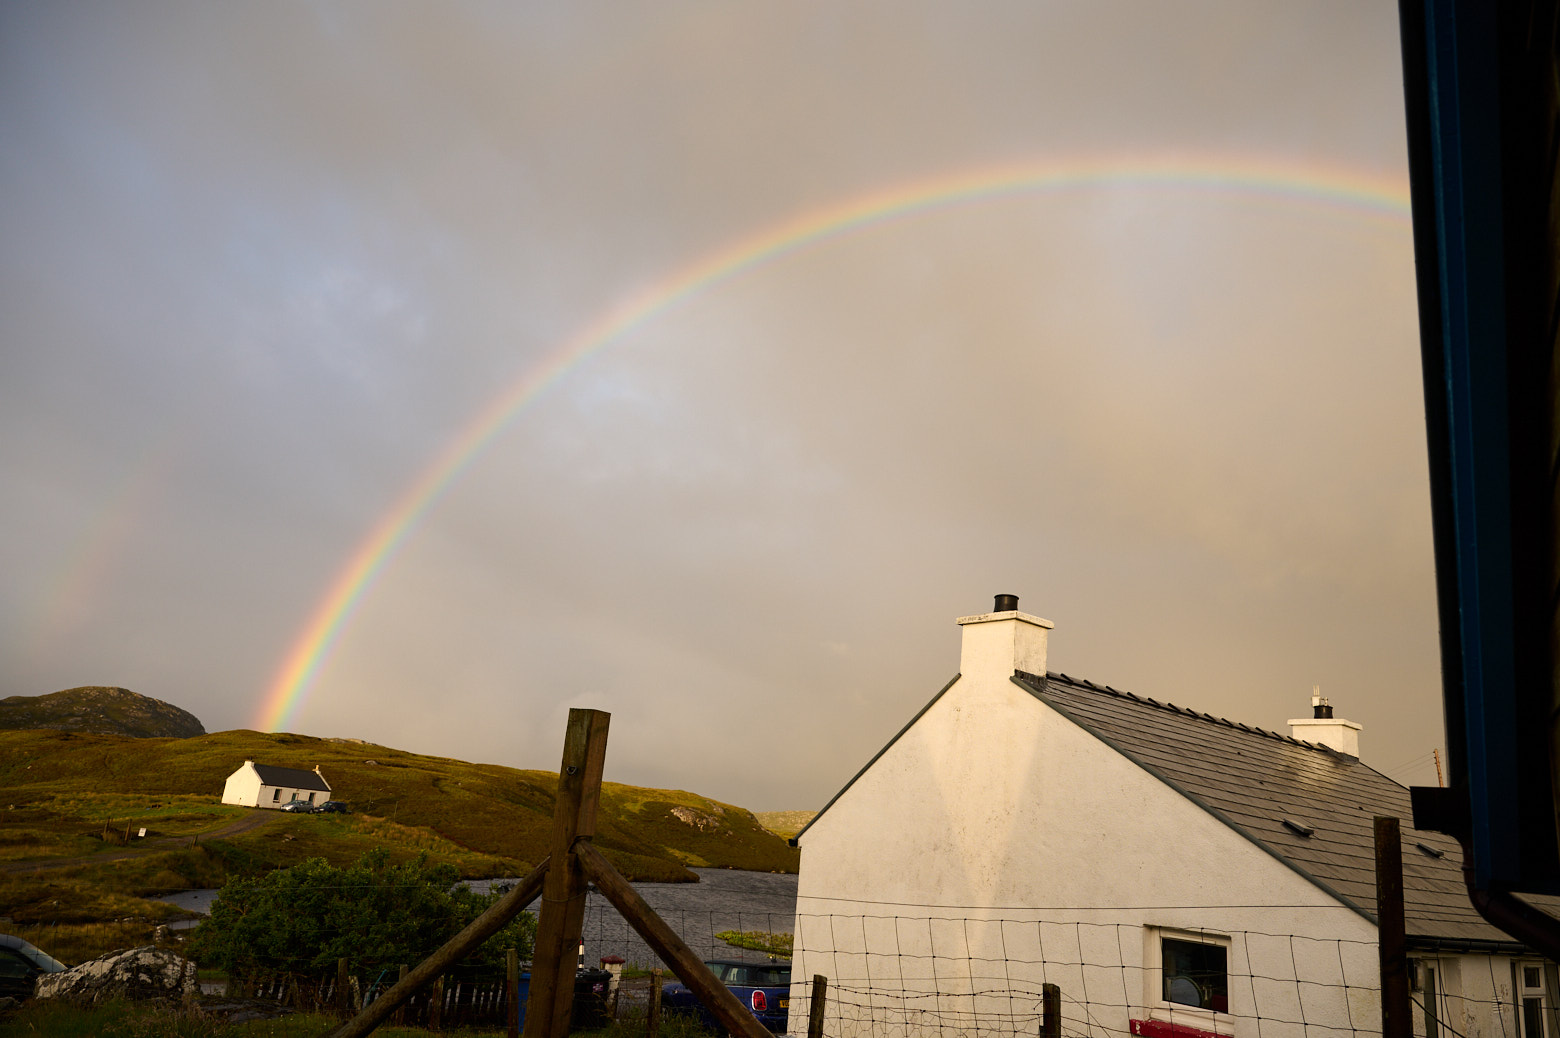 A rainbow over Grimsay, North Uist. Outer Hebrides